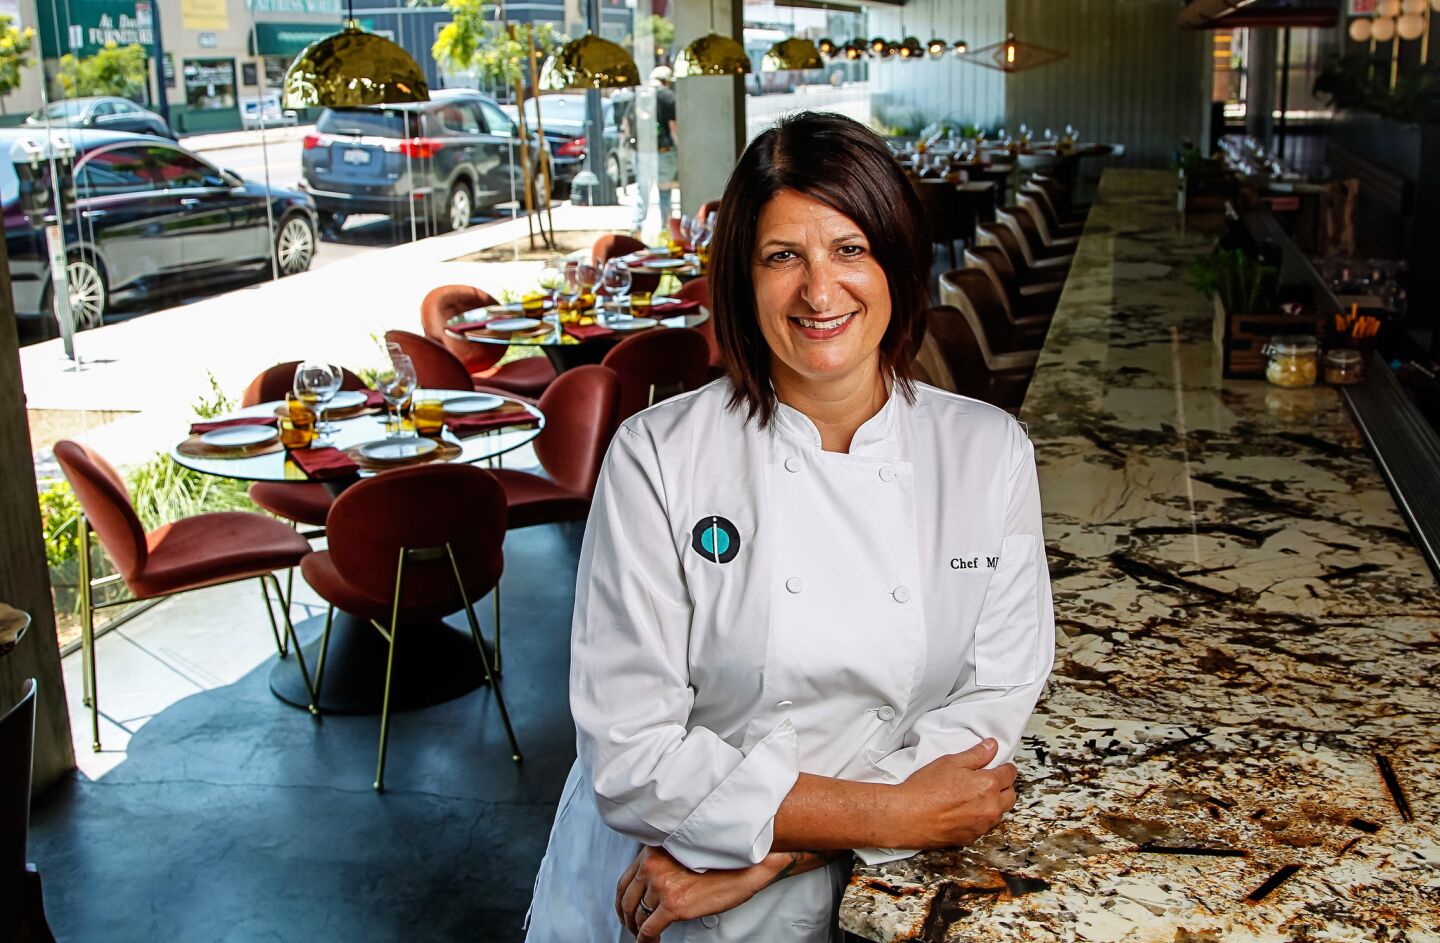 Already known around town for her culinary skills — she once co-owned the fast casual Salad Style, worked as sauté chef at Laurel and was chef at Caffè Calabria — Maryjo "MJ" Testa had just come back from a sabbatical in Italy in 2015 when Matthew Ramon asked her to take the culinary helm at insideOUT, a new restaurant he was opening in Hillcrest.